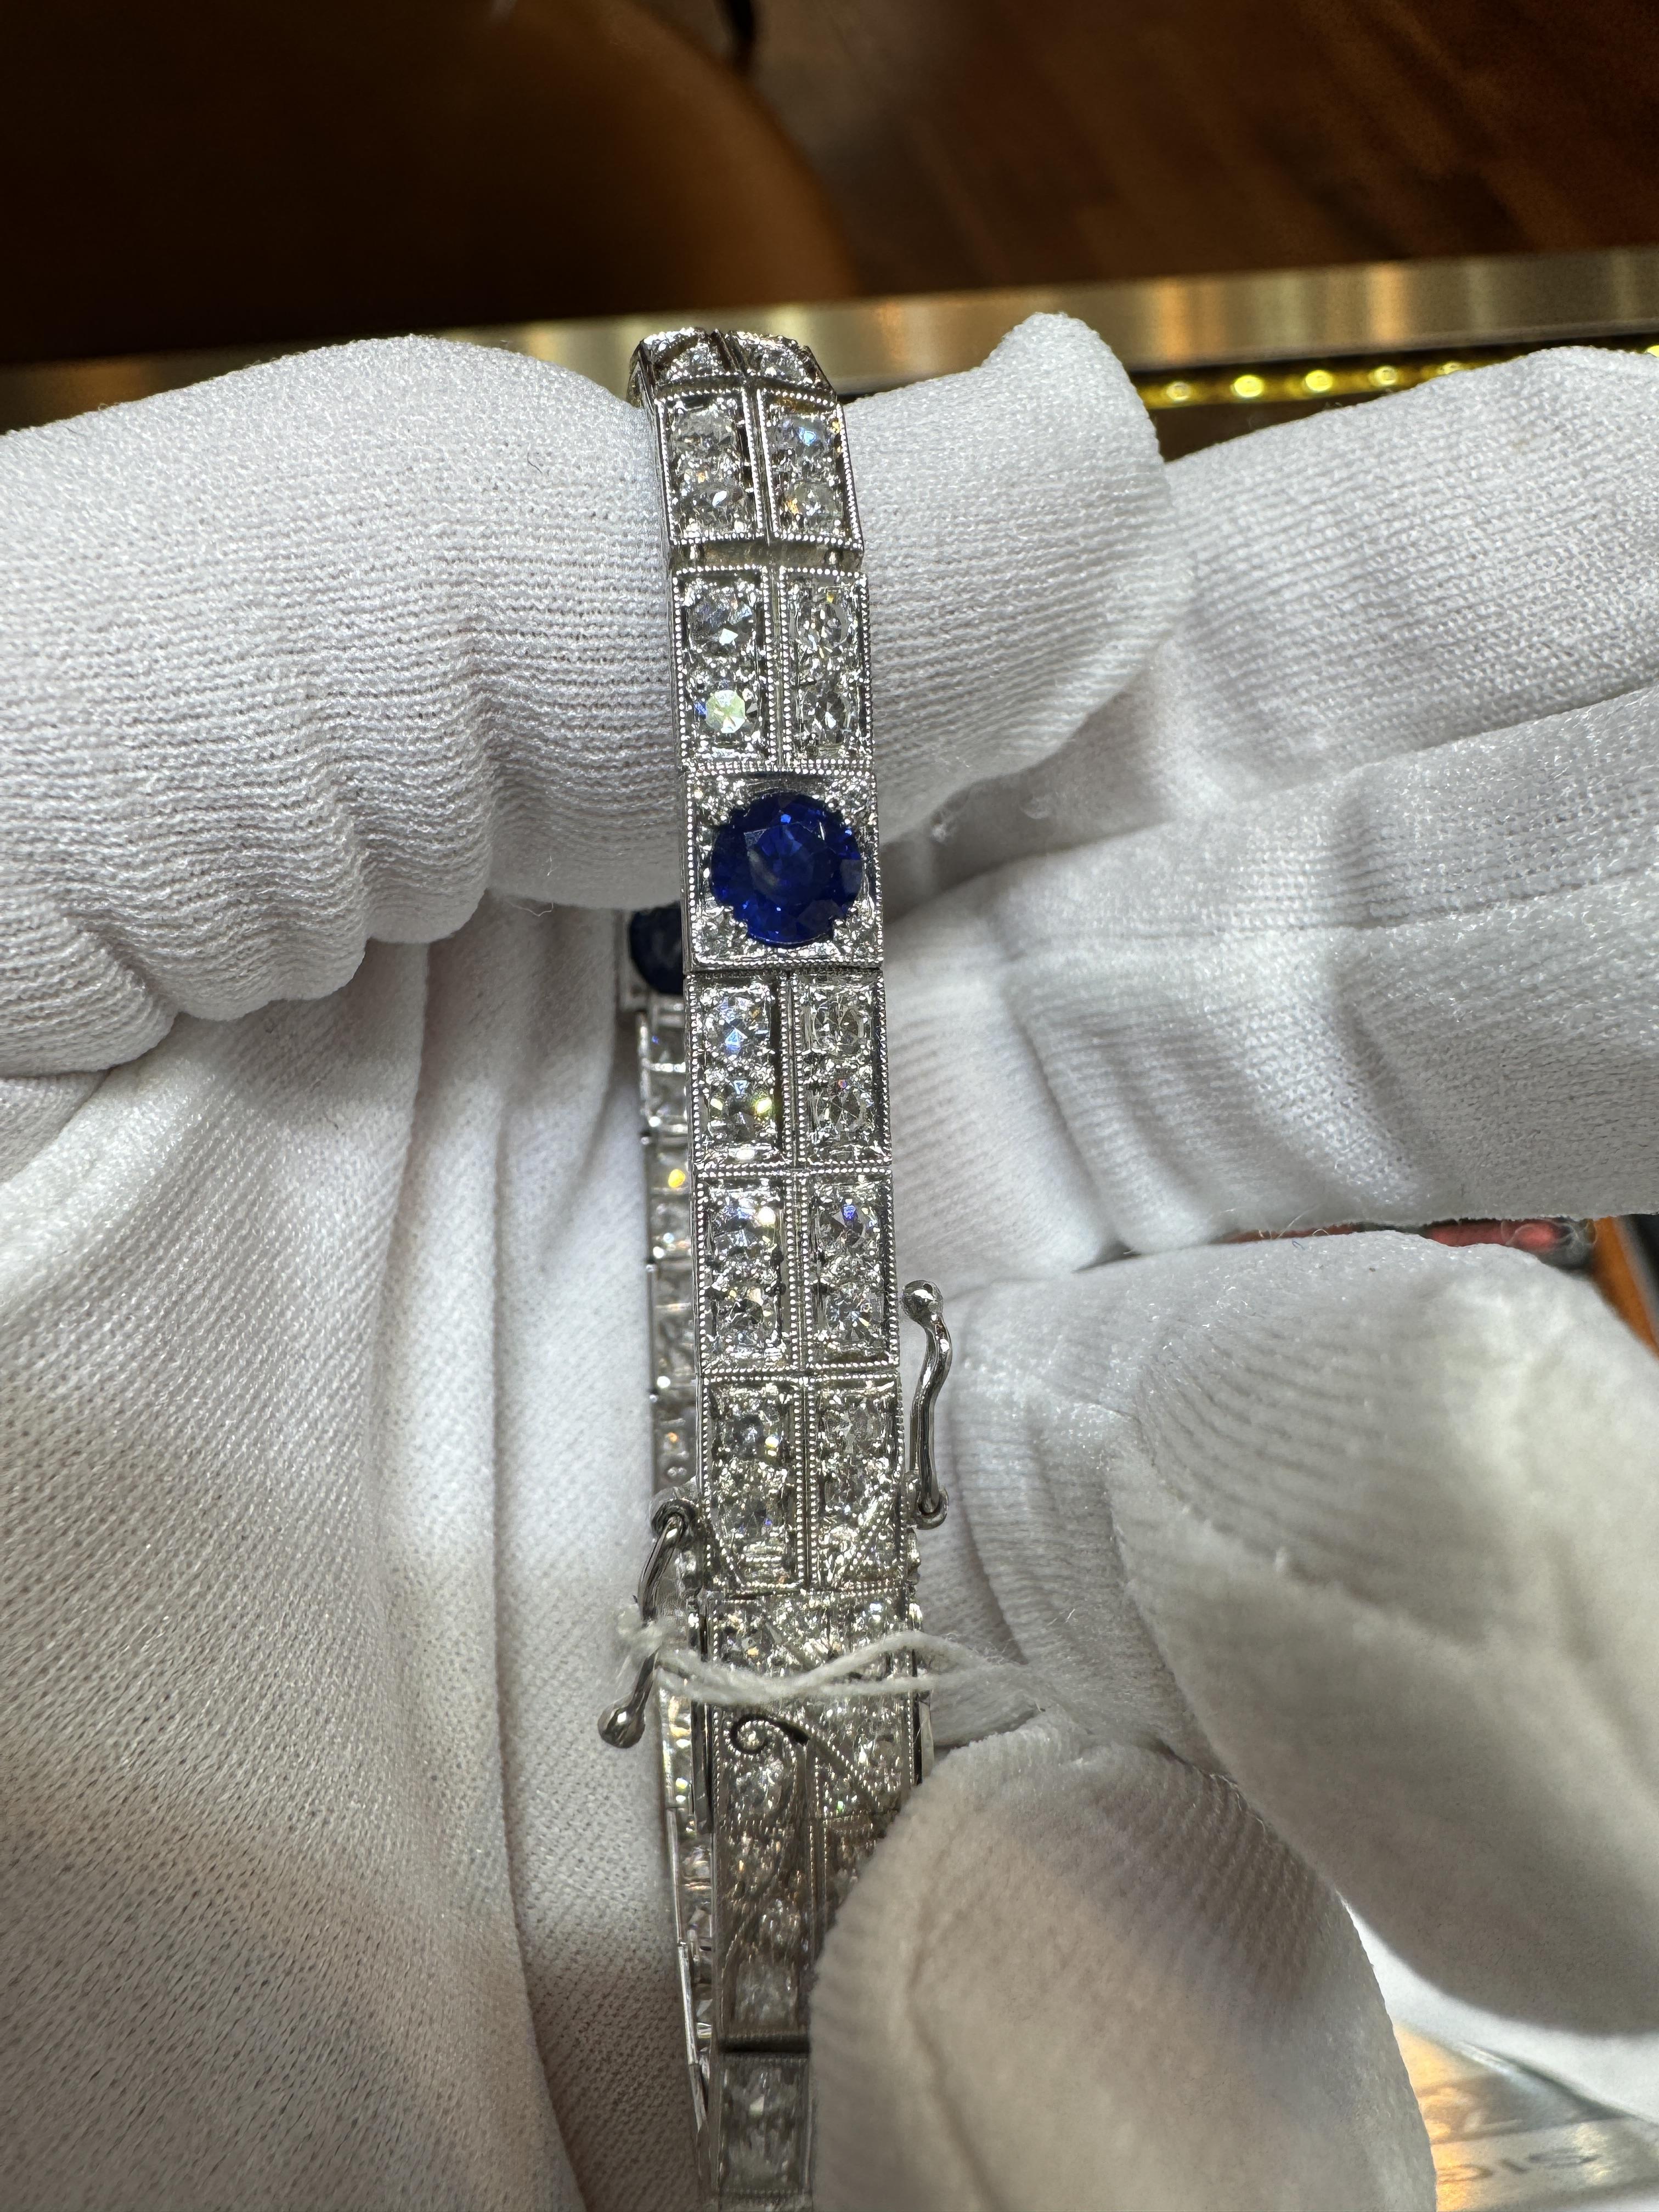 Hermann Marcus Signed Antique Art Deco Blue Sapphire and Diamond Bracelet in Platinum.  

Featuring 3 round cut blue sapphires and 118 round cut diamonds, made with a stunning and superbly detailed filigree setting on platinum. A quintessentially